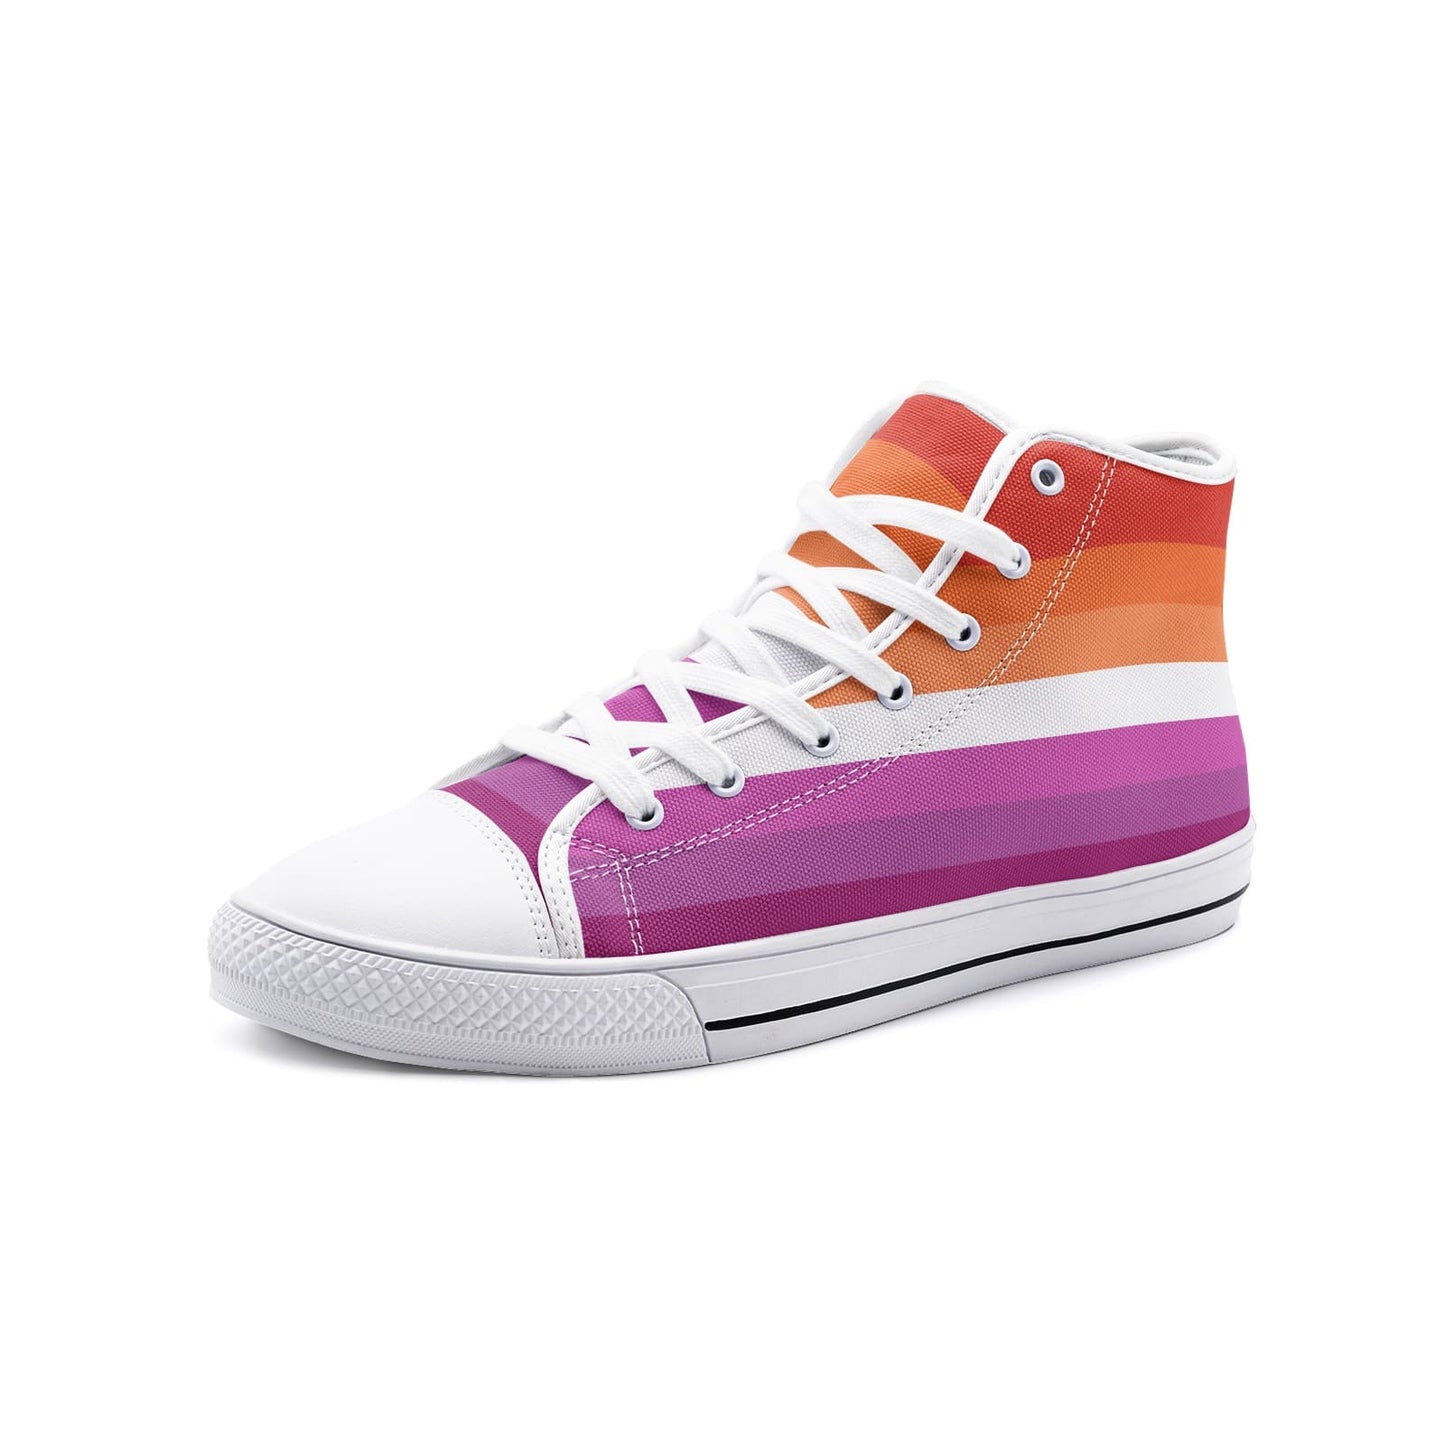 lesbian shoes, sunset flag wlw pride sneakers, white